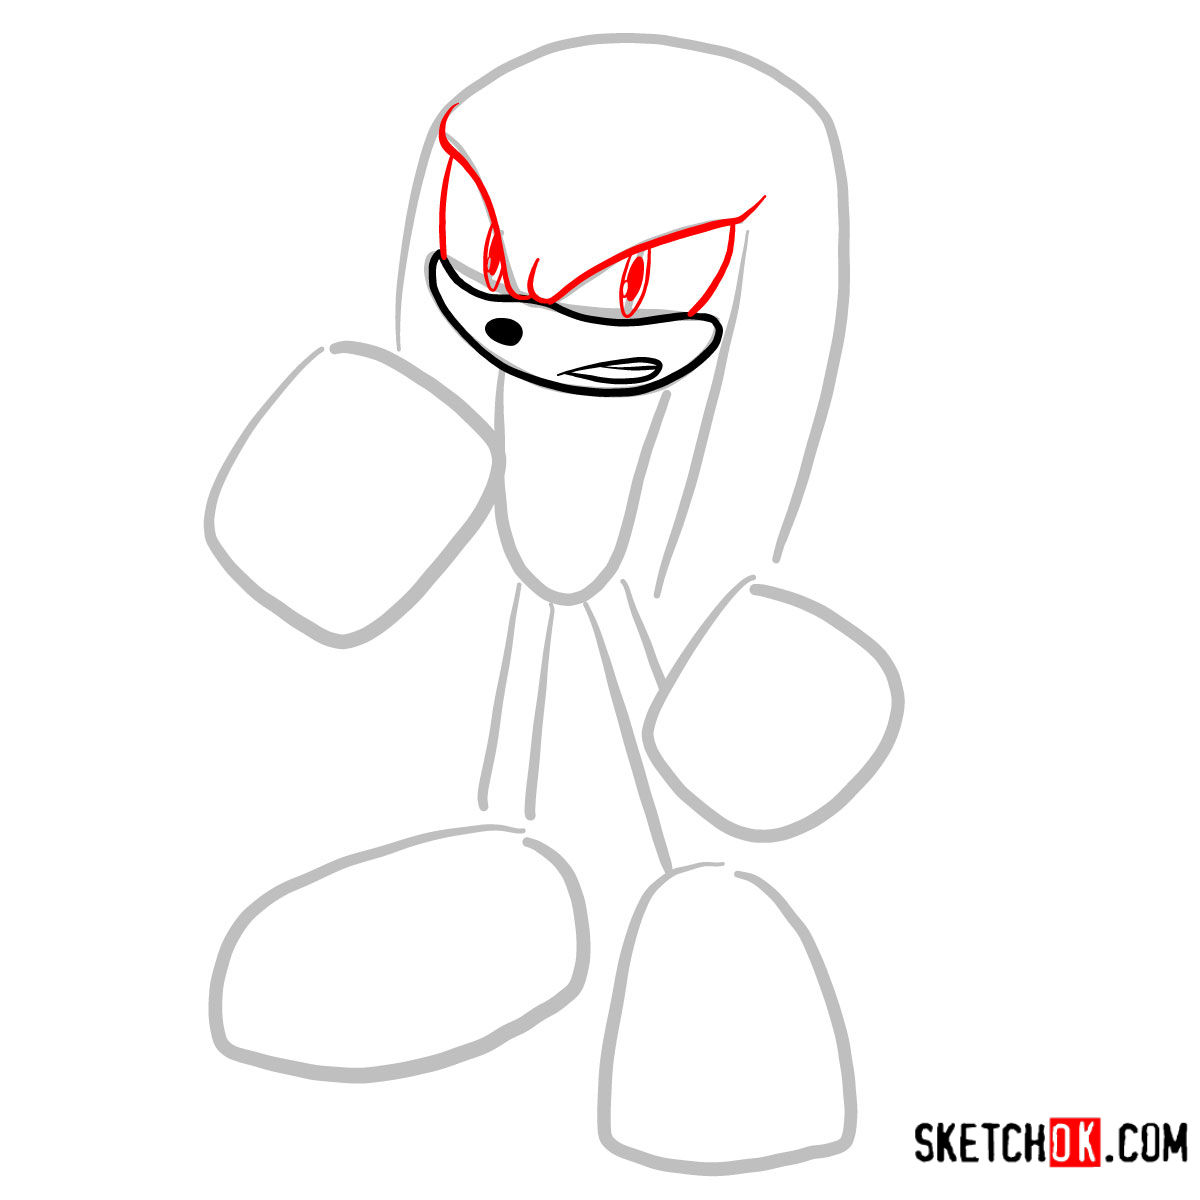 How to draw Knuckles the Echidna | Sonic the Hedgehog - step 03